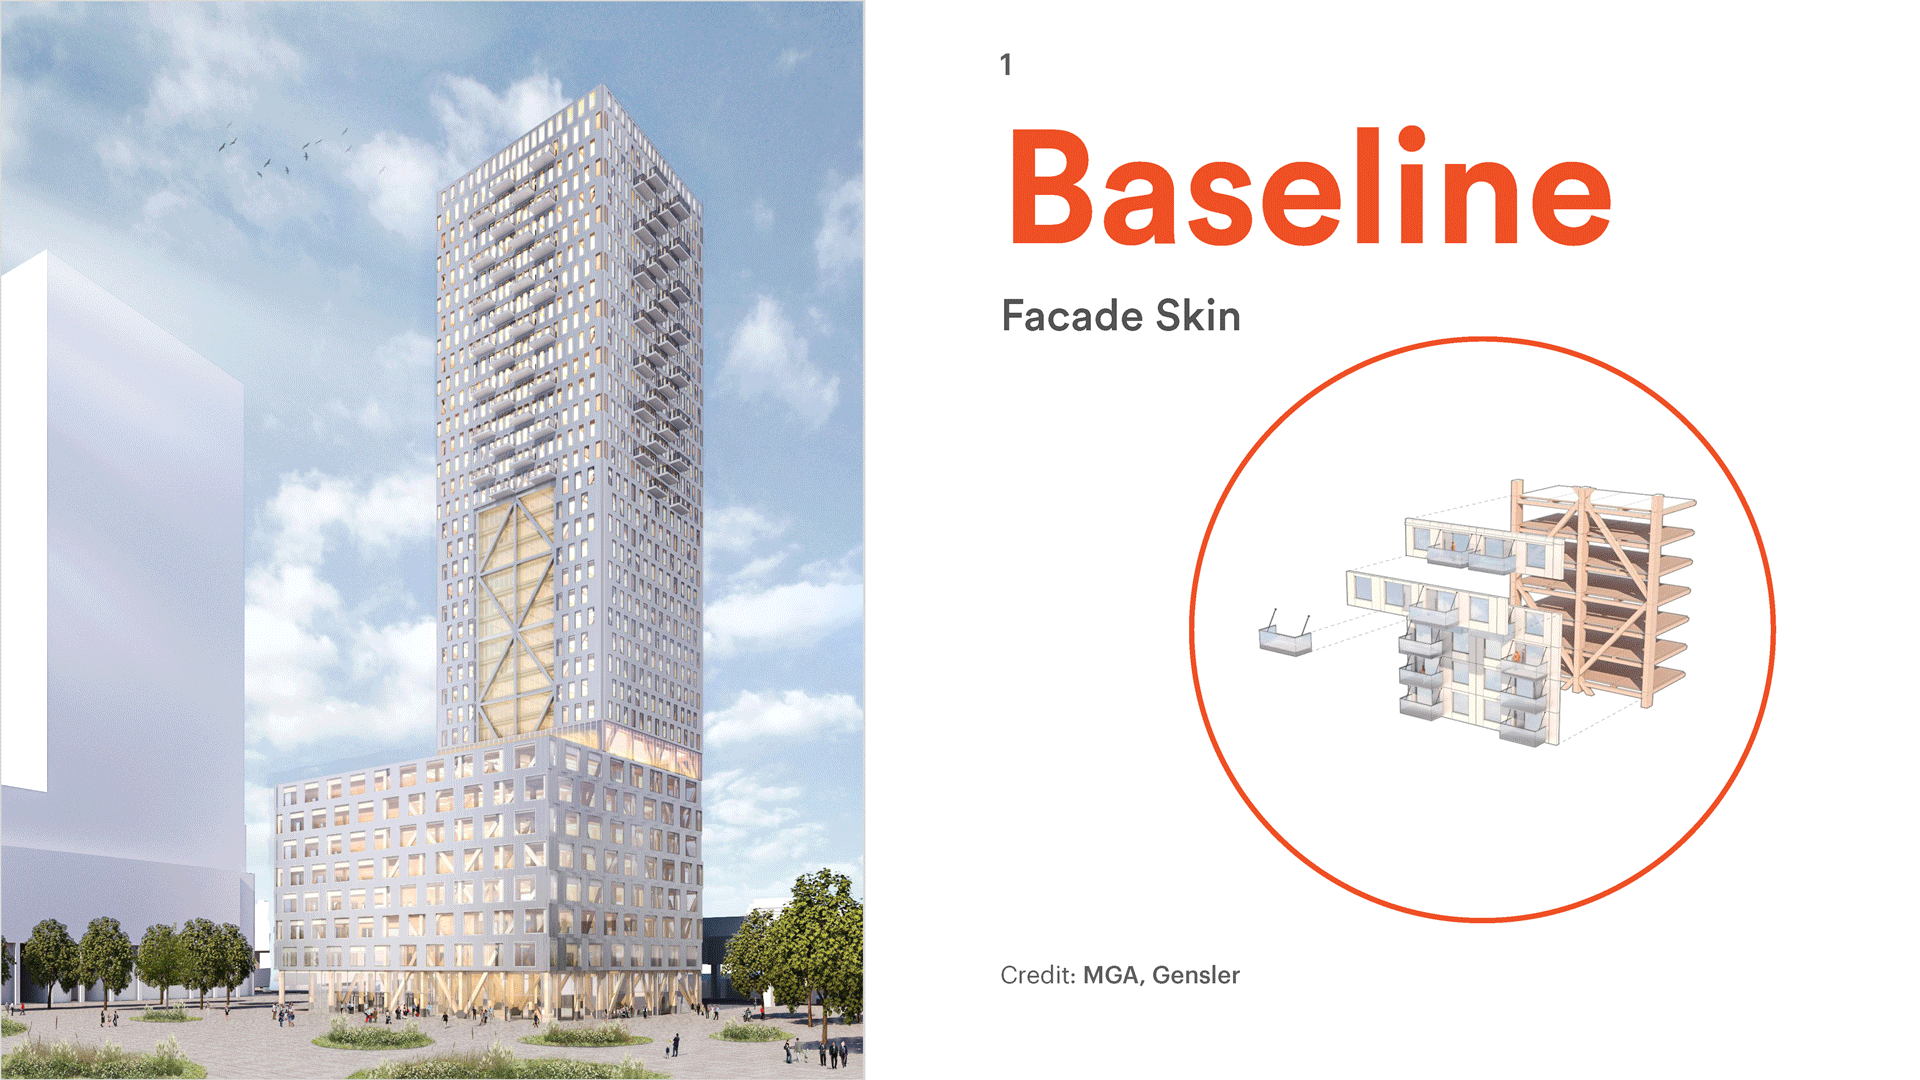 Gif shows the same high-rise building (PMX) with different facades.